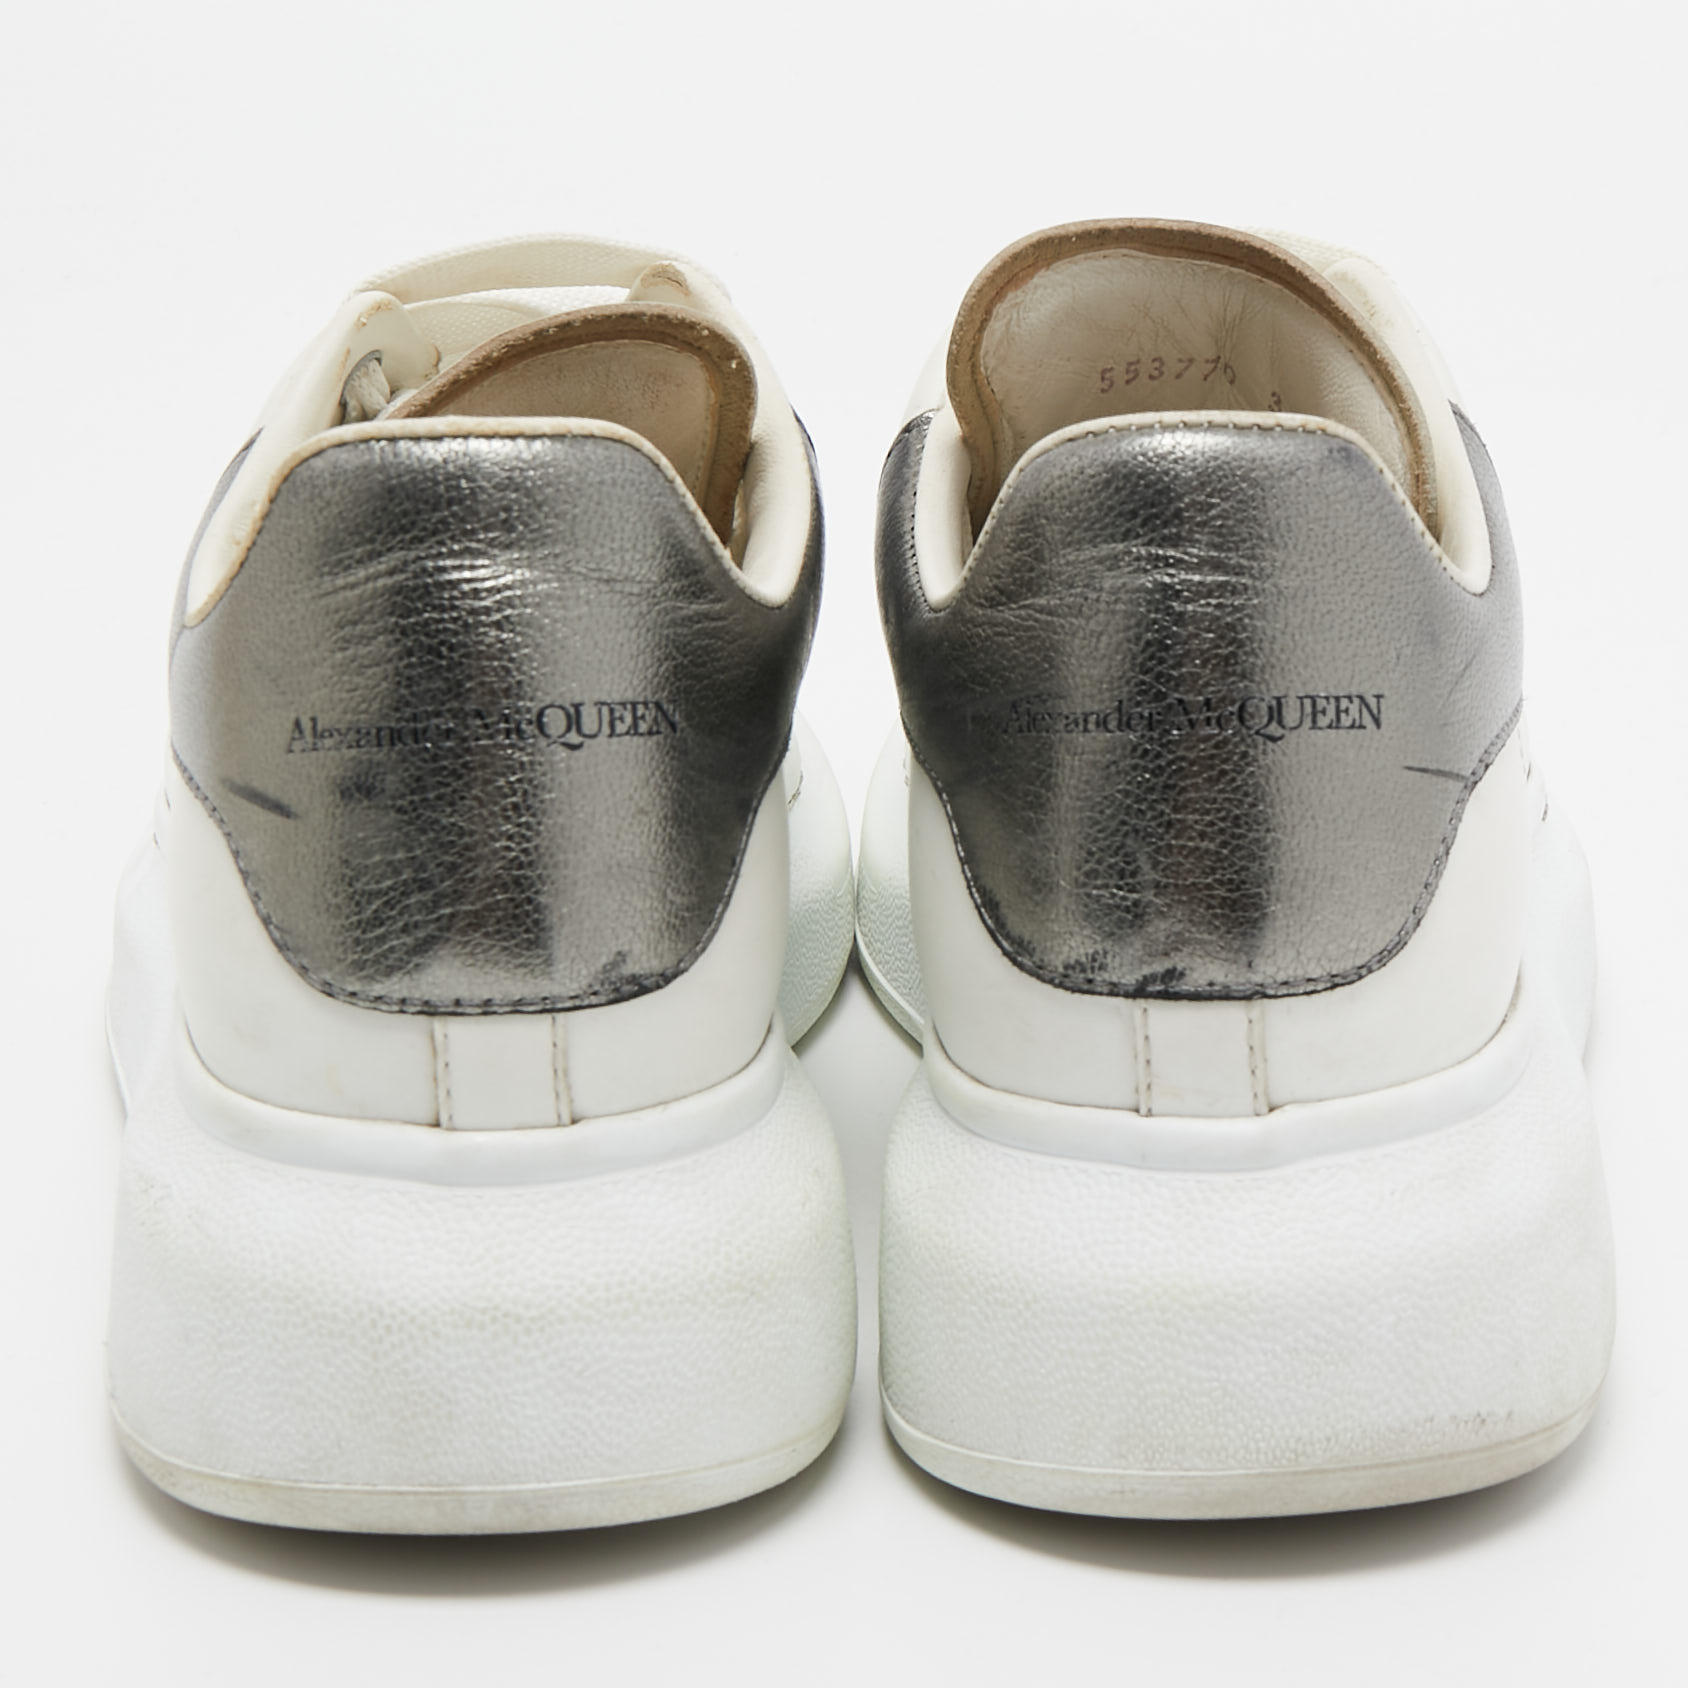 Alexander McQueen White/Grey Leather Oversized Sneakers Size 38.5